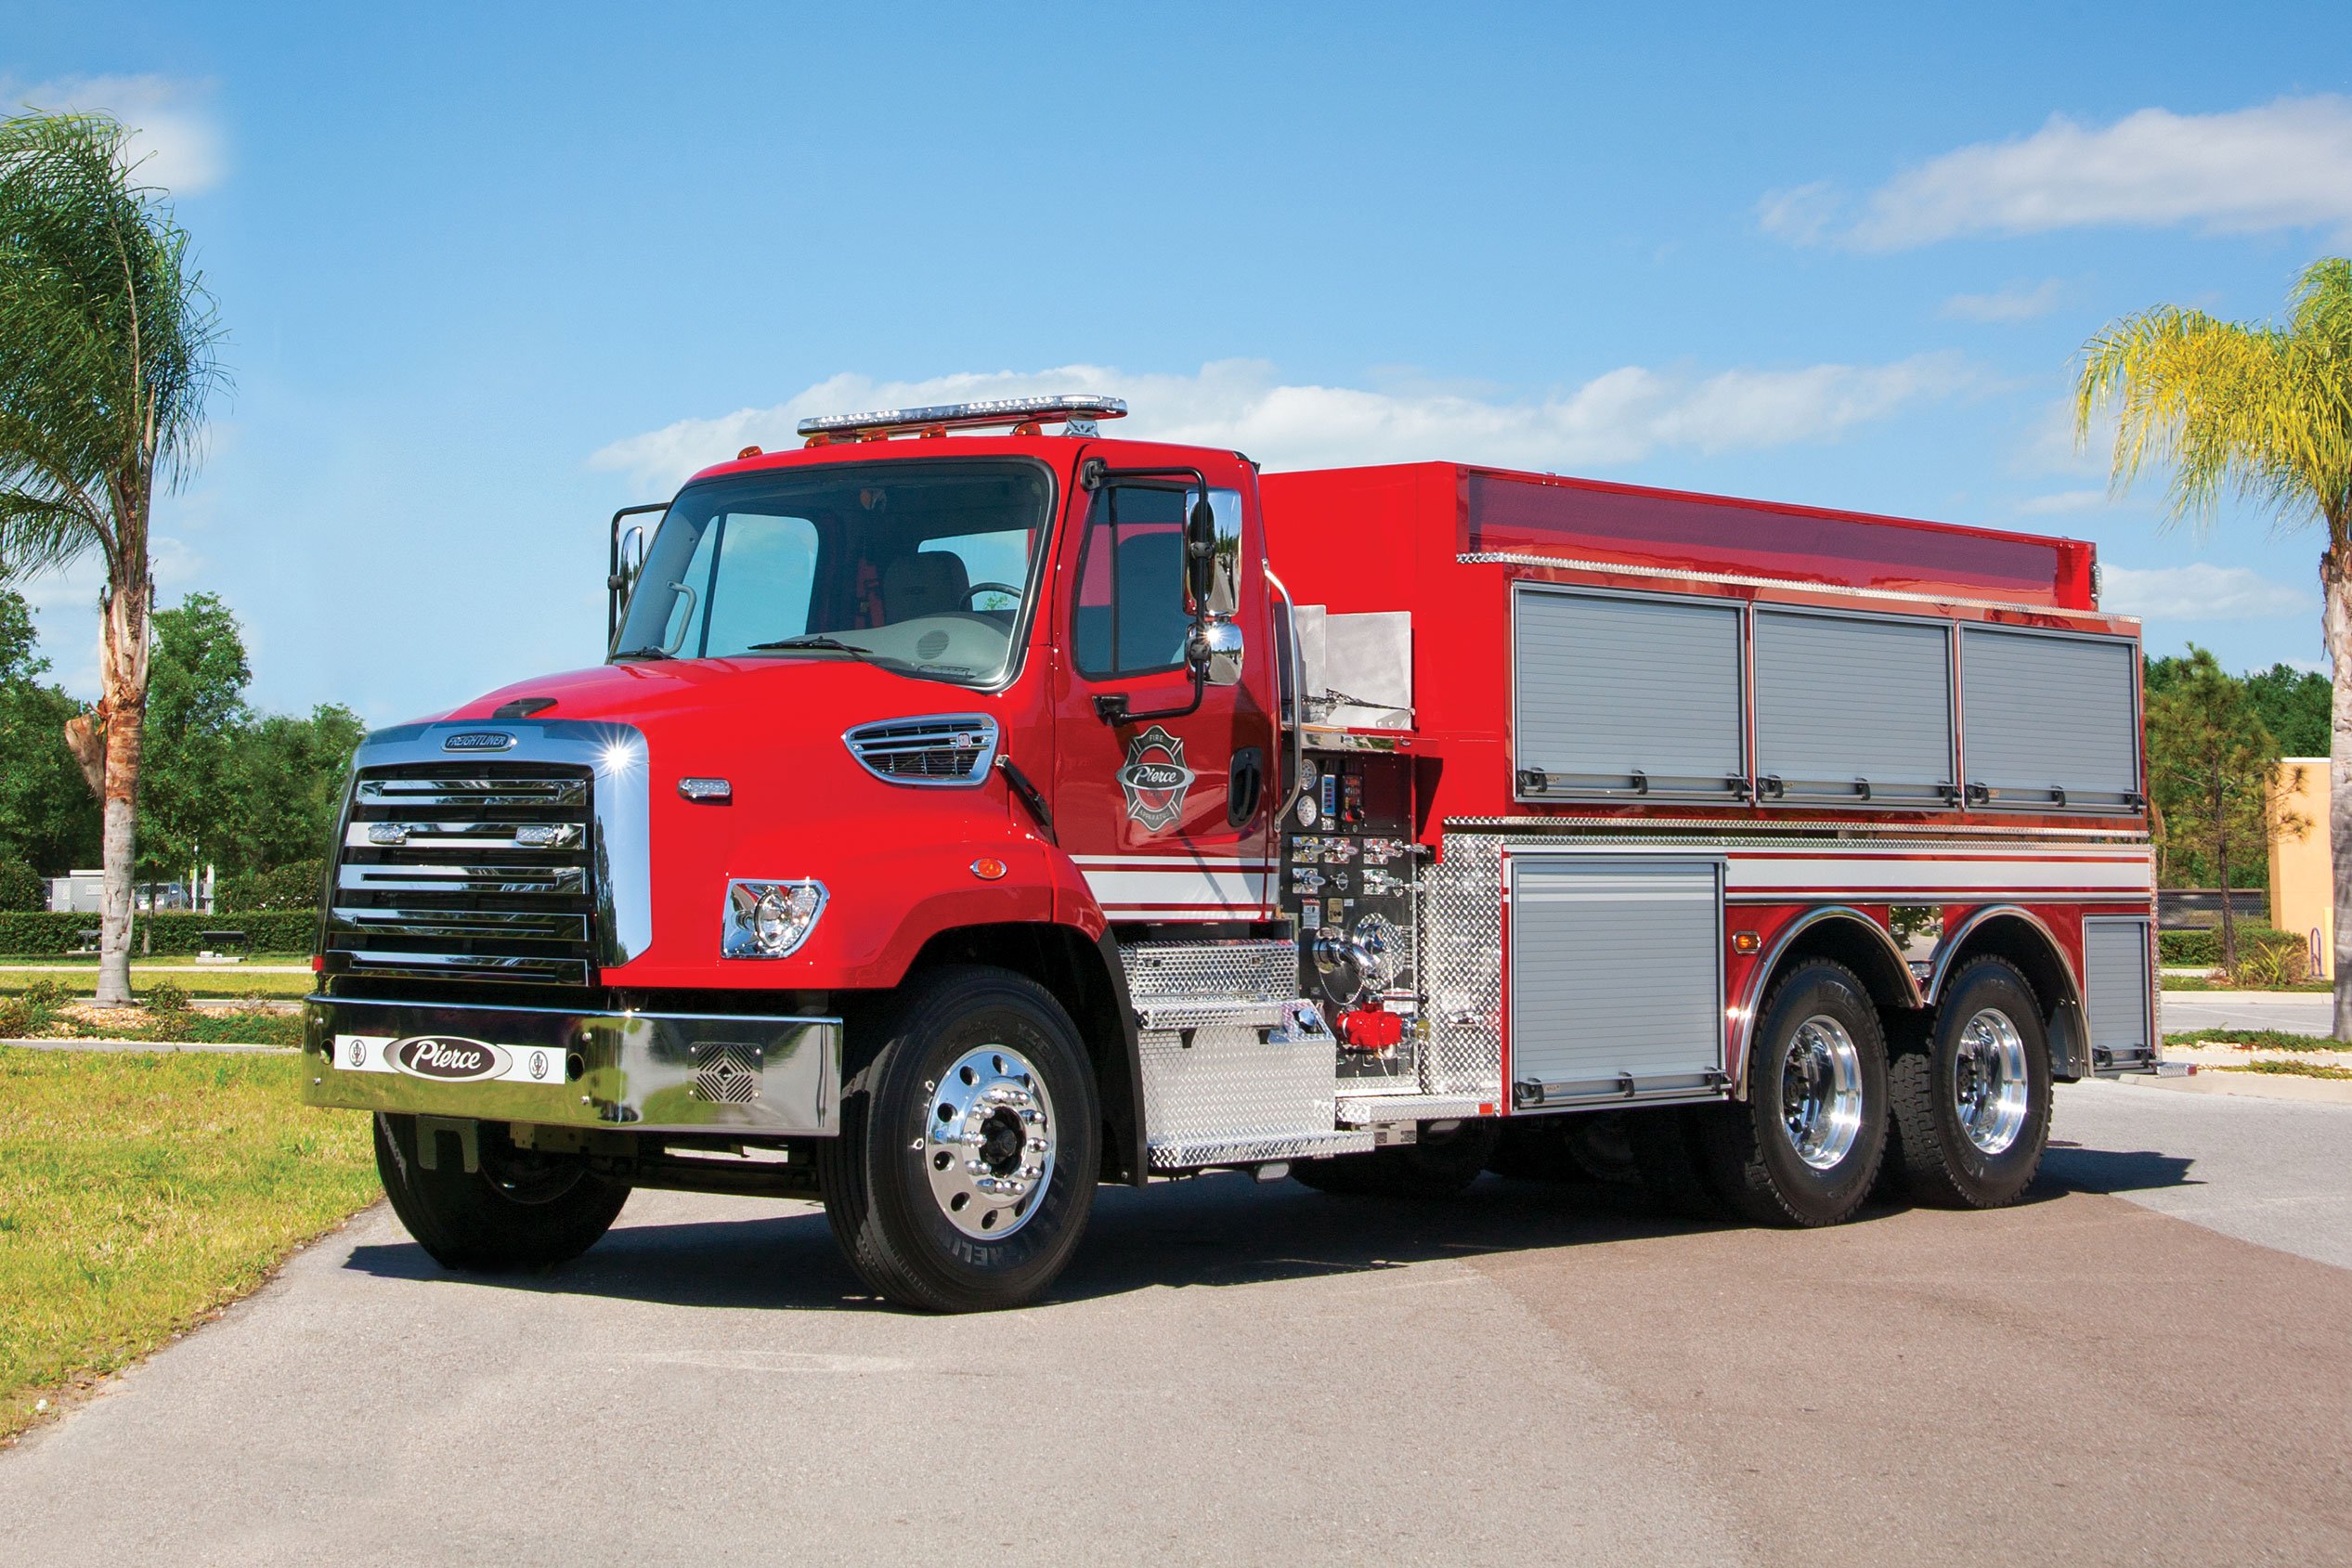 Pierce Commercial Fire Truck Chassis Overview